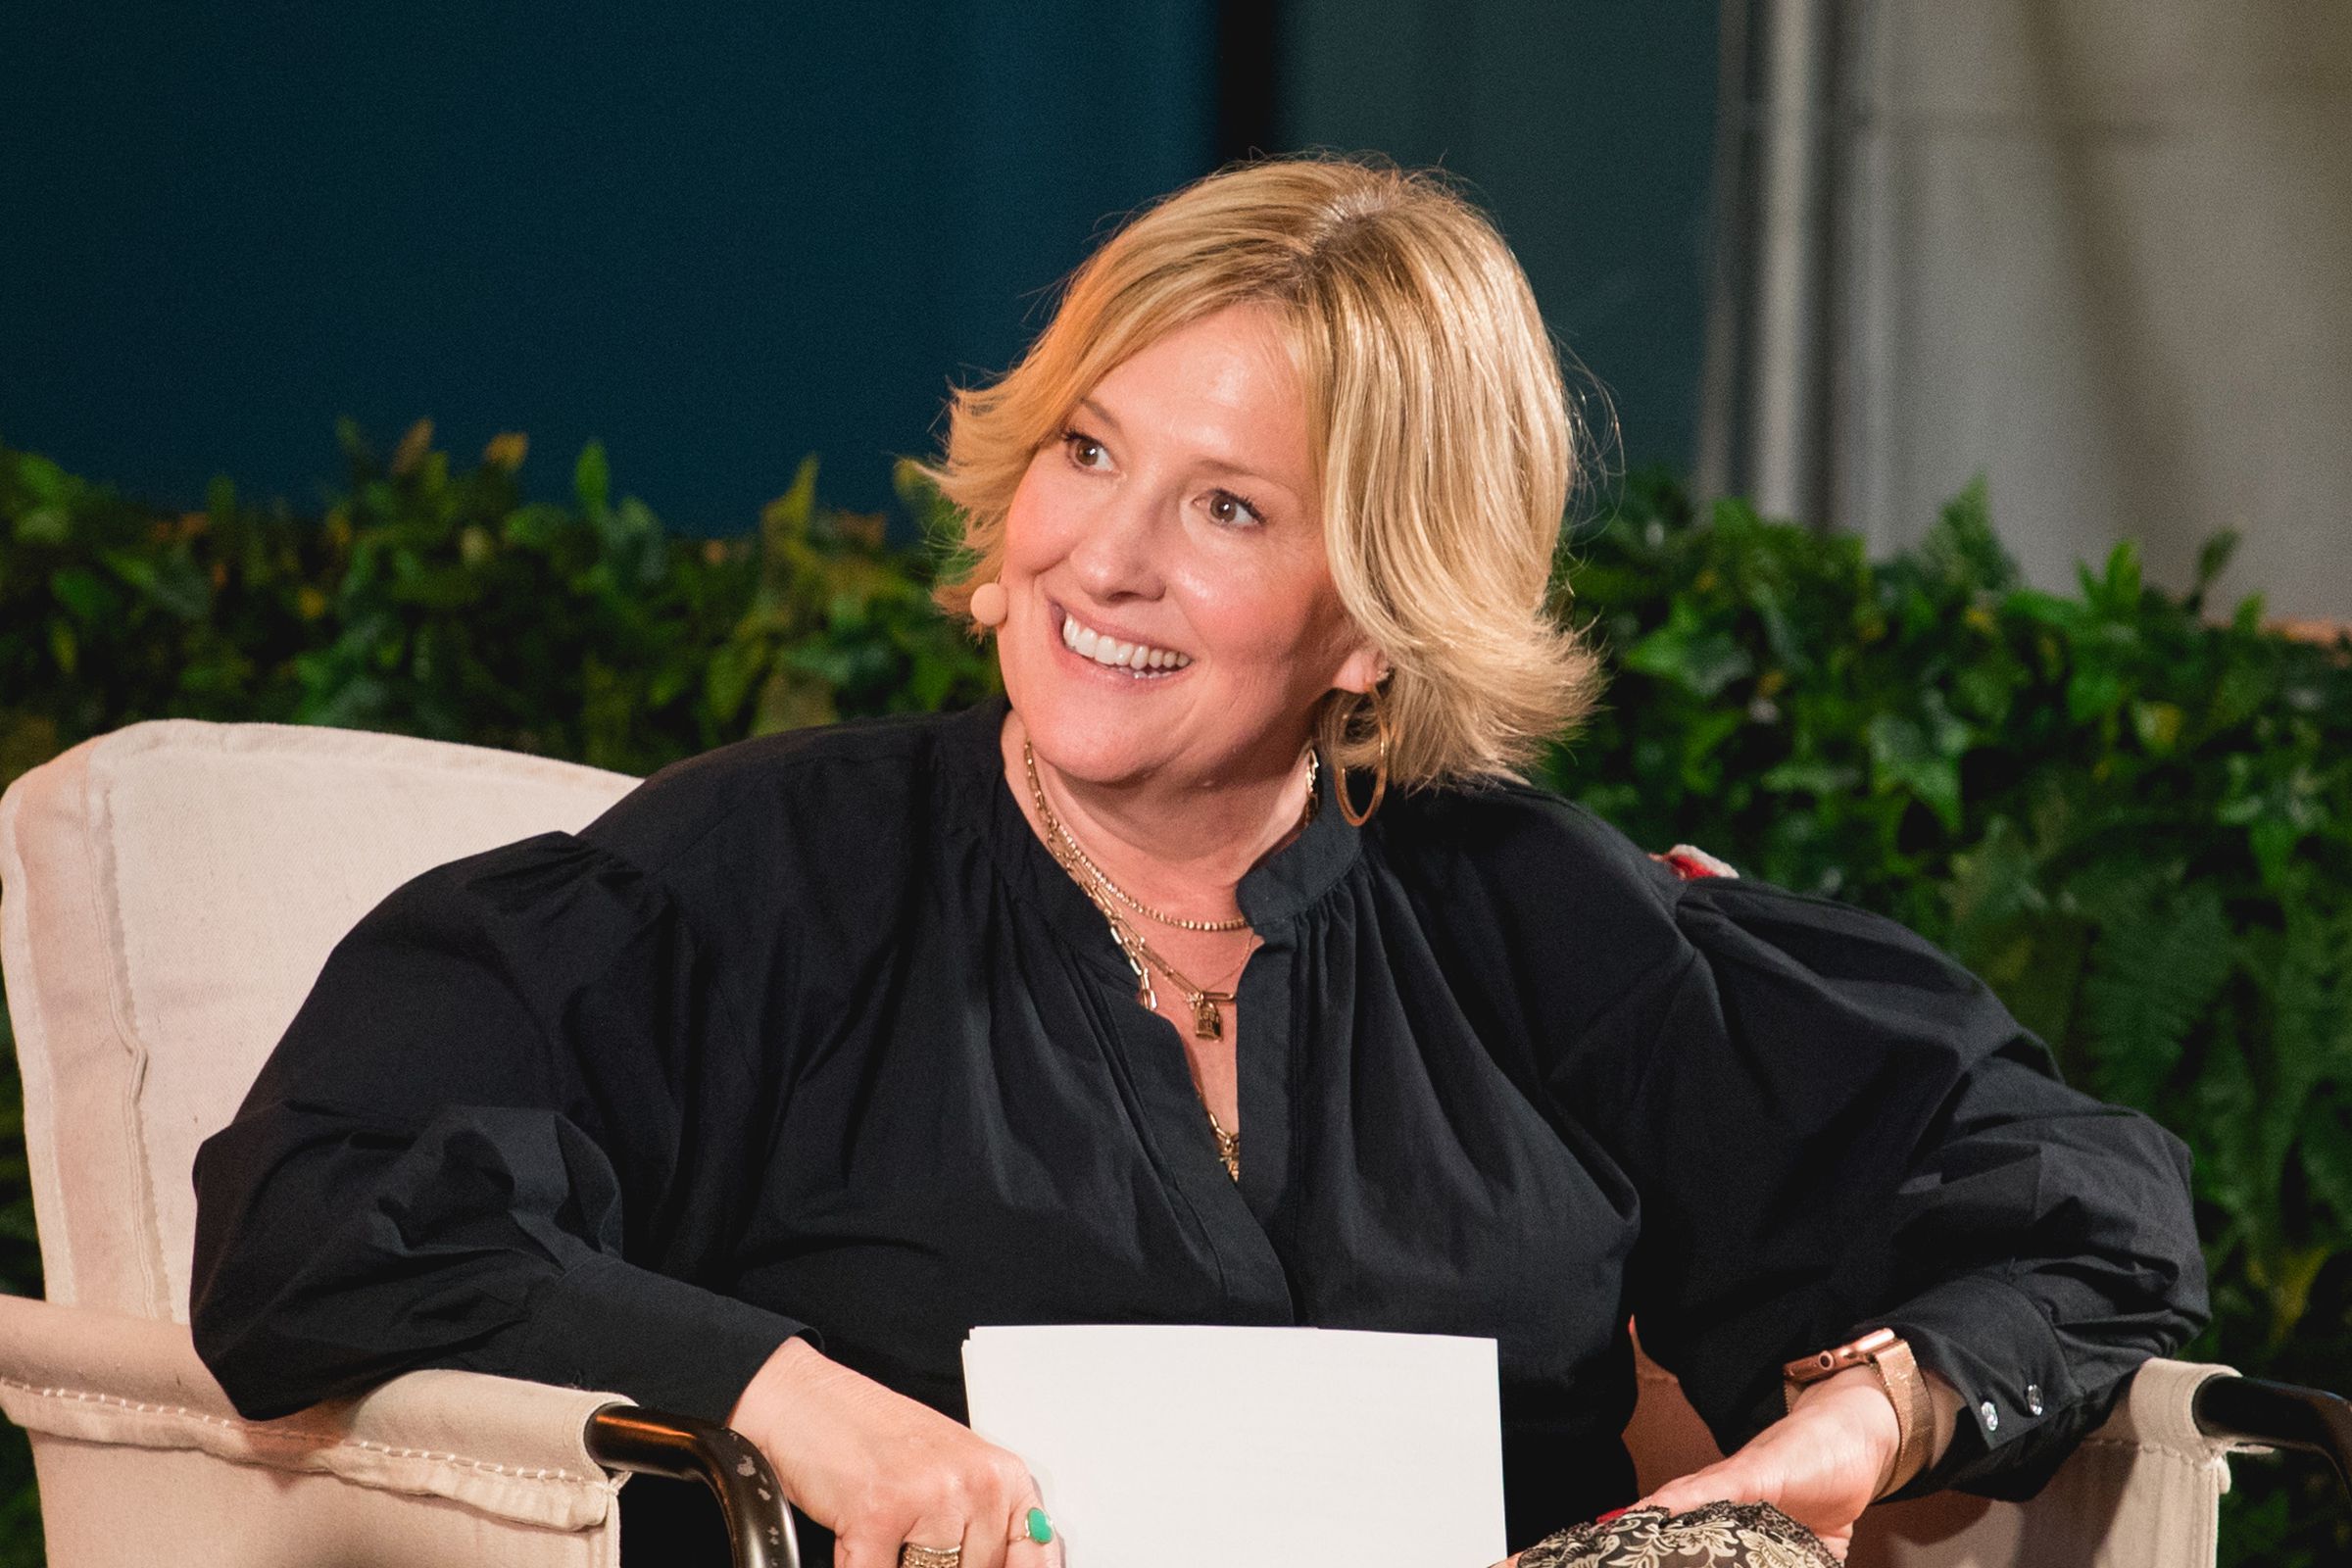 Brené Brown is the host of popular podcasts Unlocking Us and Dare to Lead.